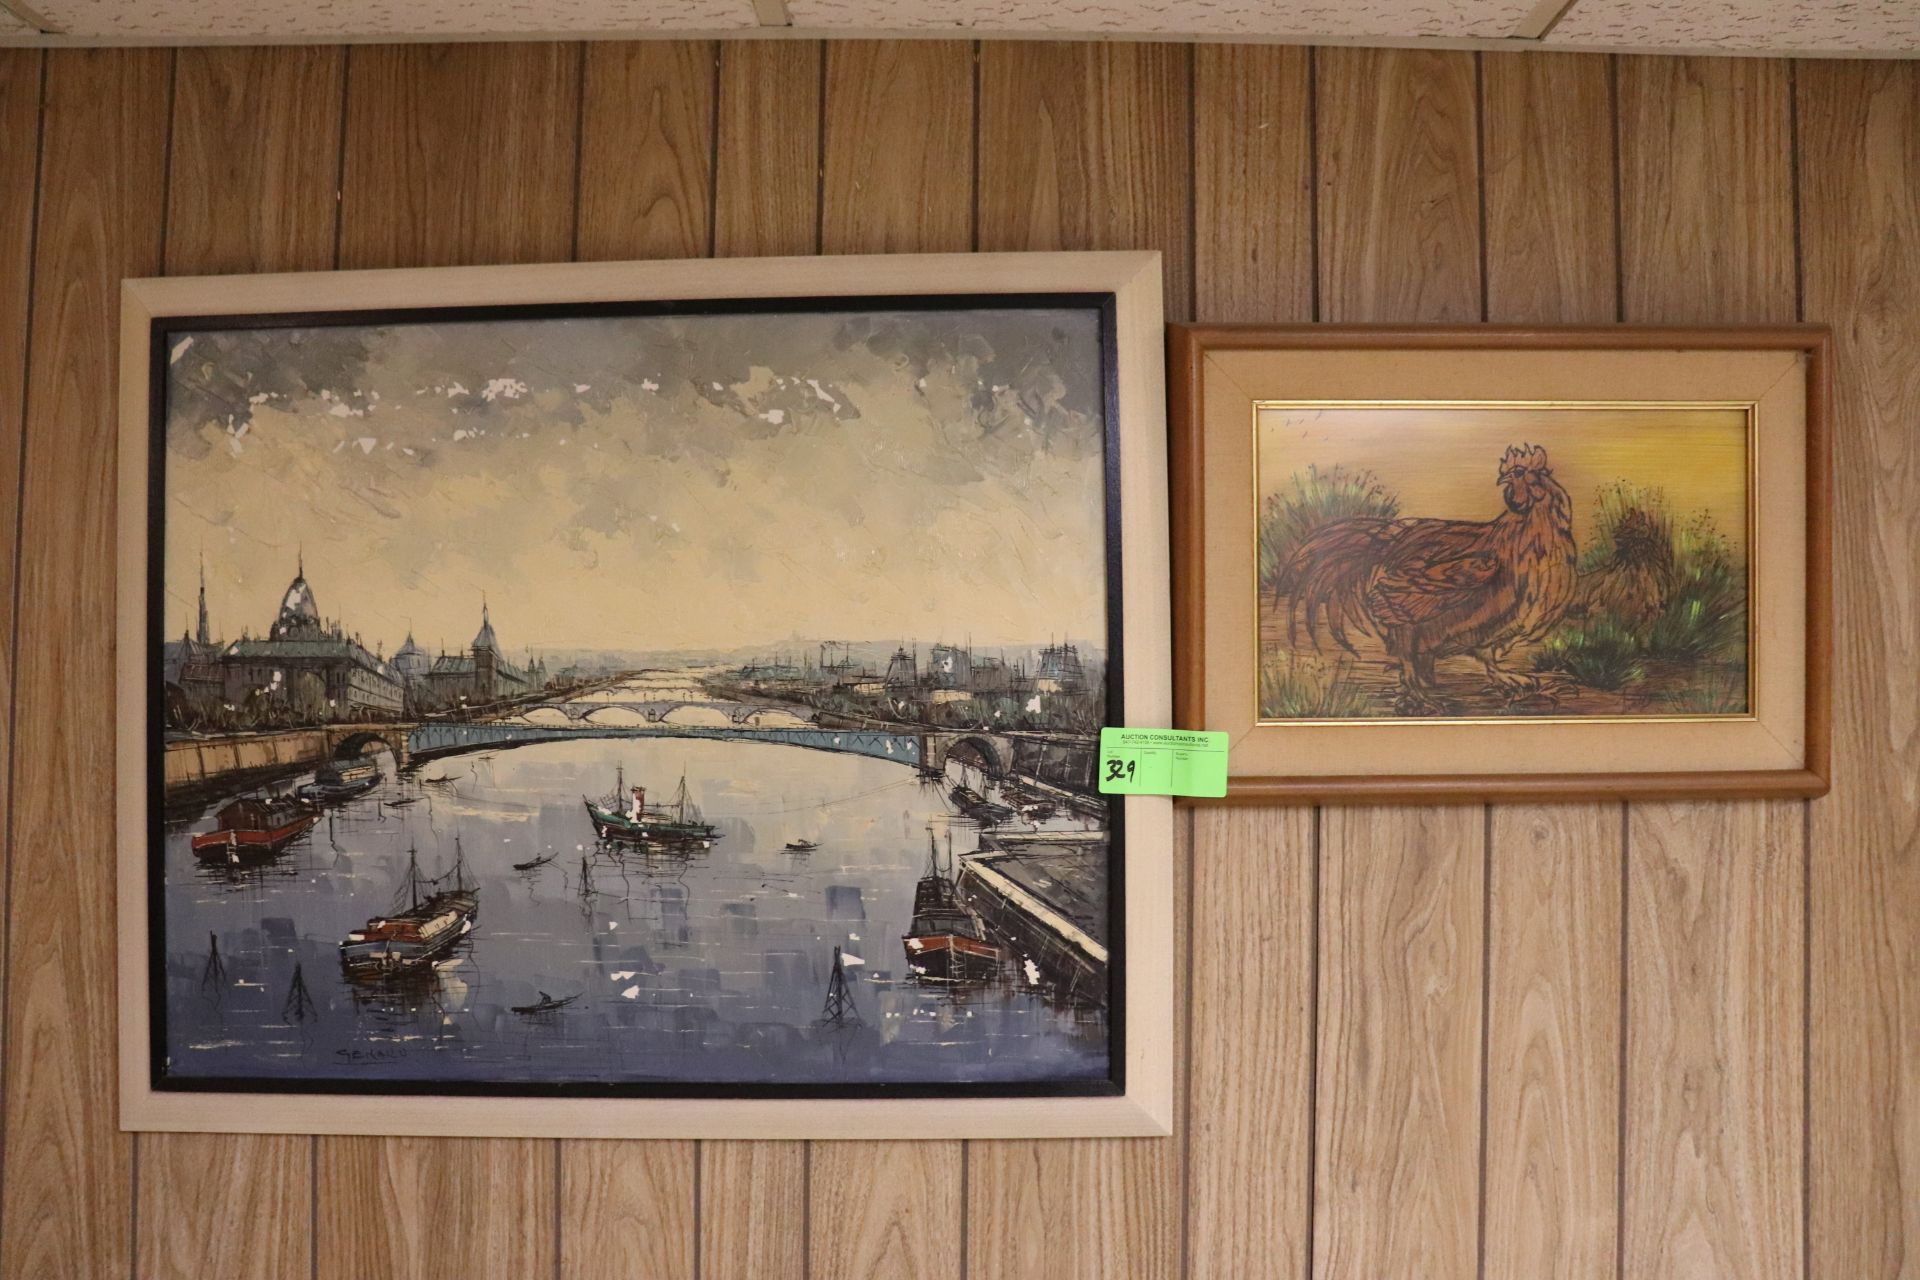 Two pieces of artwork: oil on canvas with river scene with boats, approximate sight size 30" x 24",